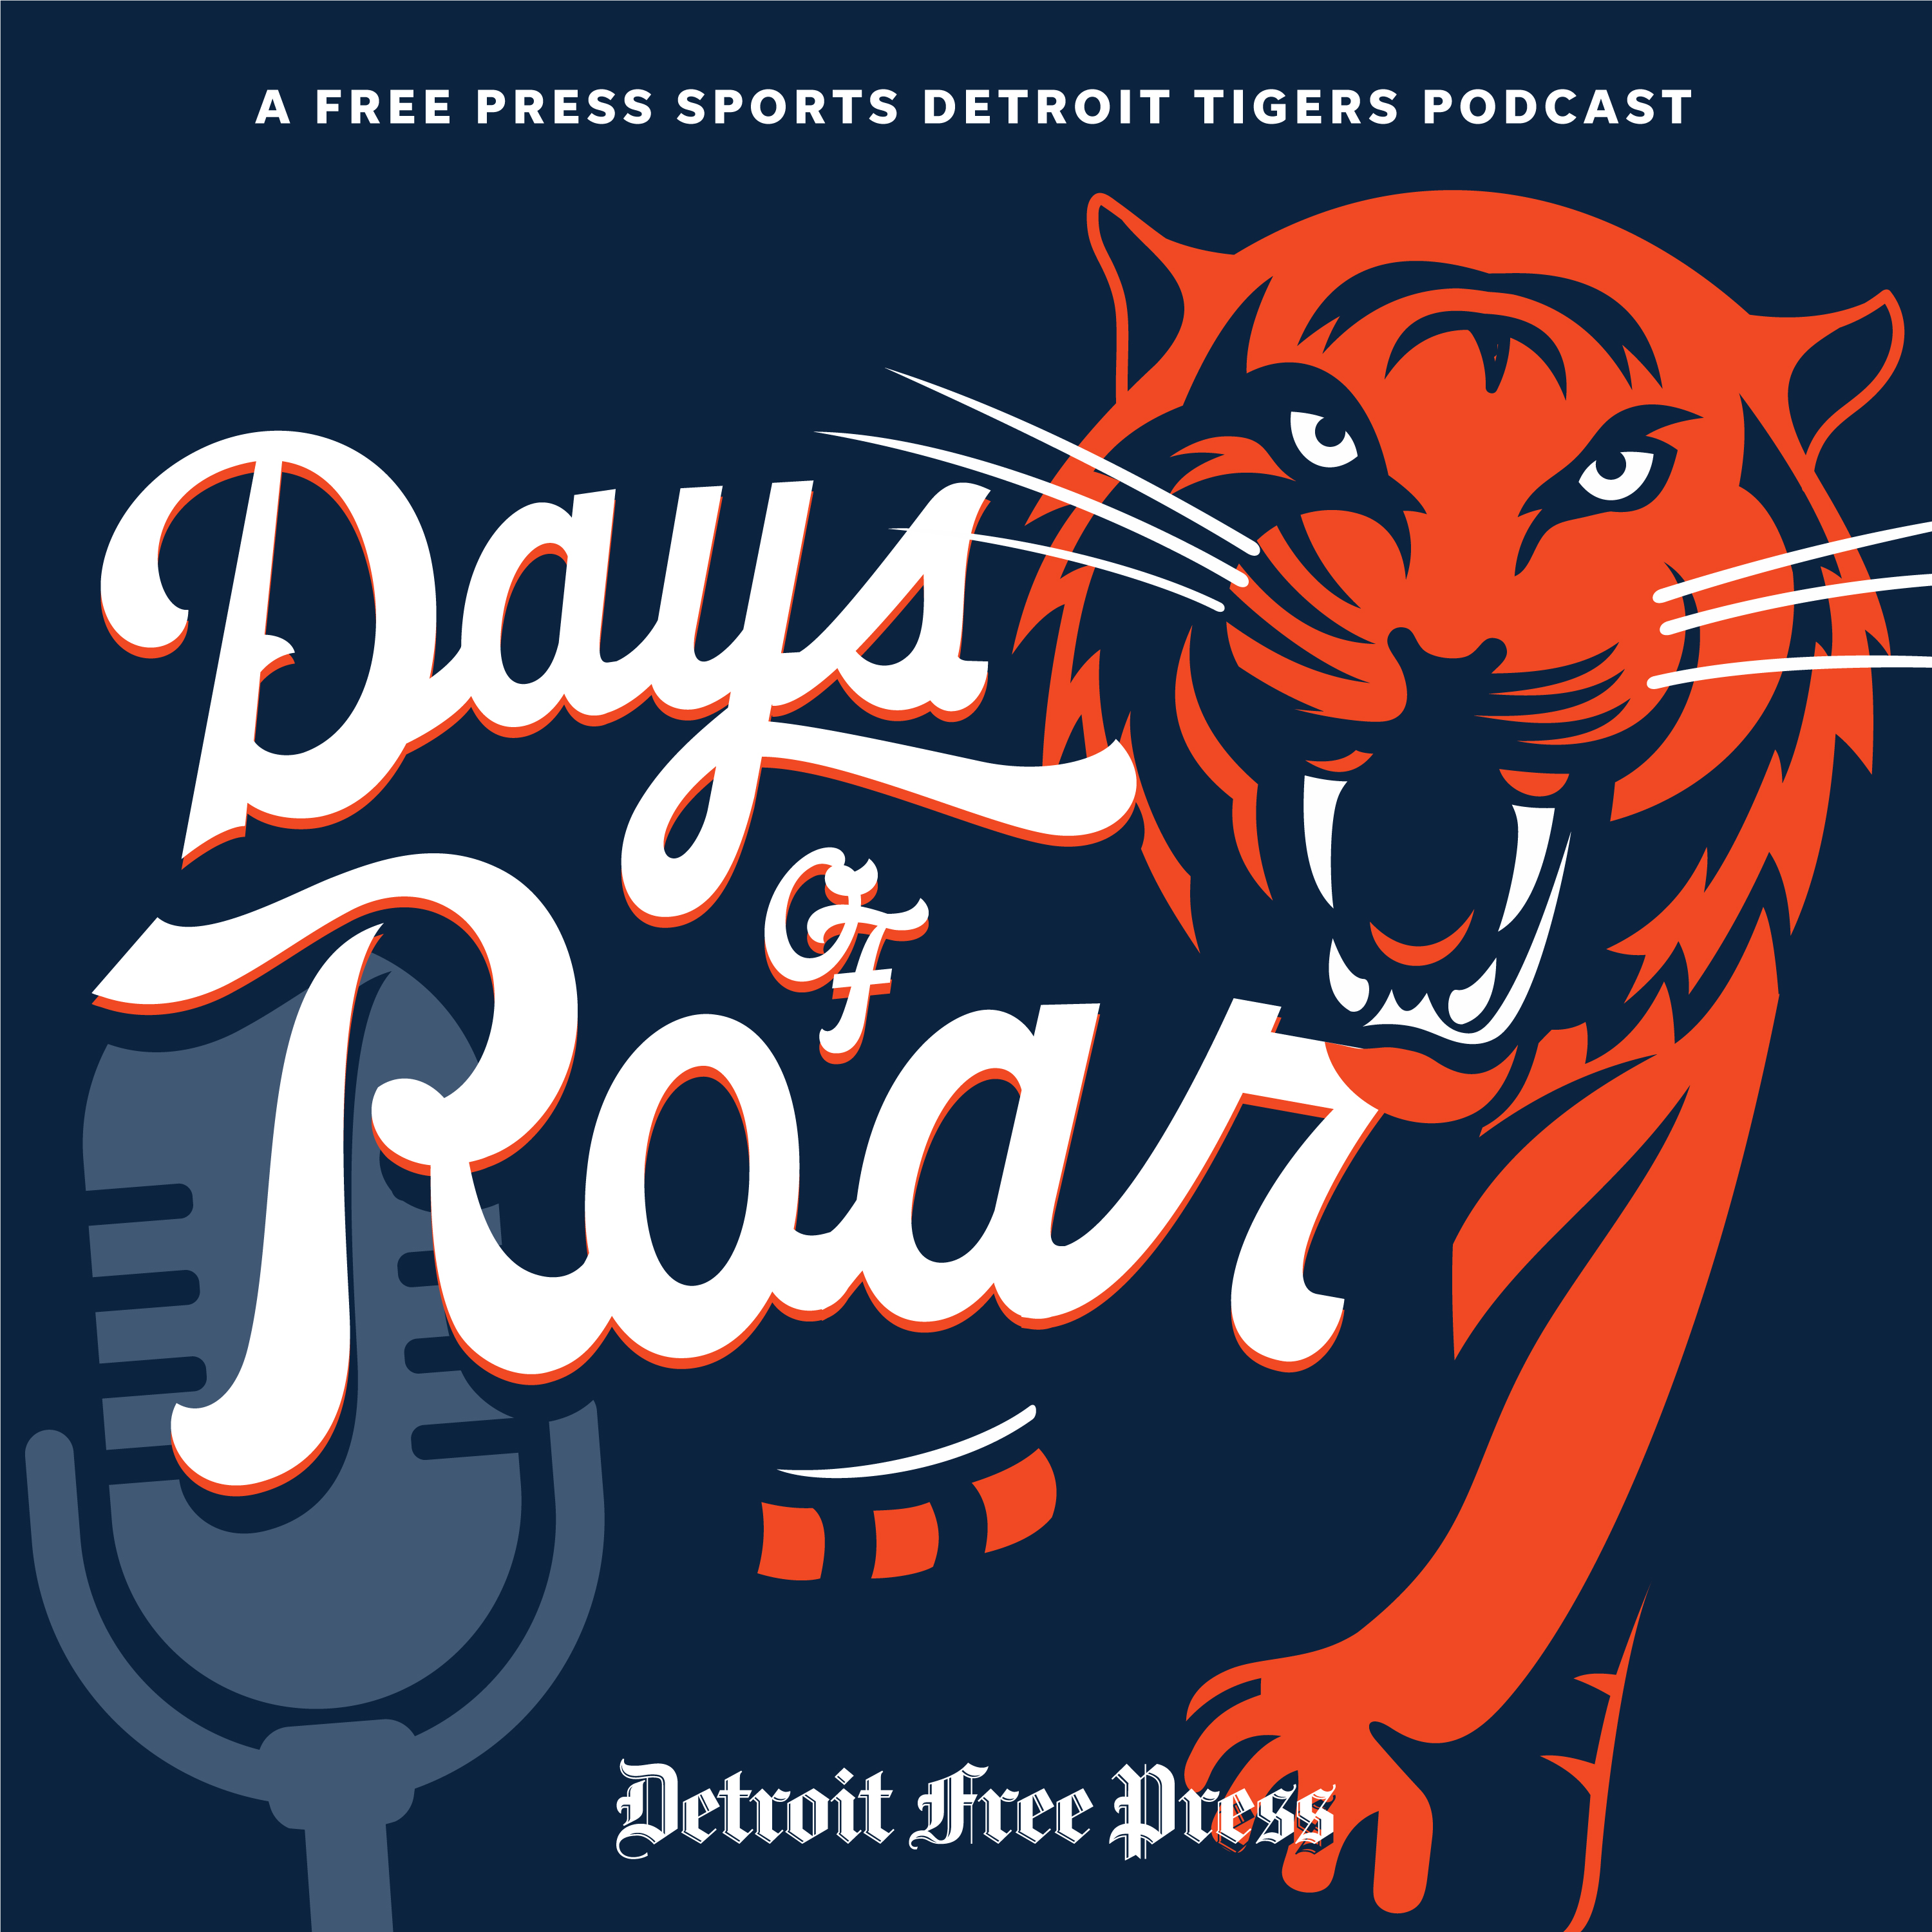 Jeff Greenberg discusses Detroit Tigers, journey from intern to general manager